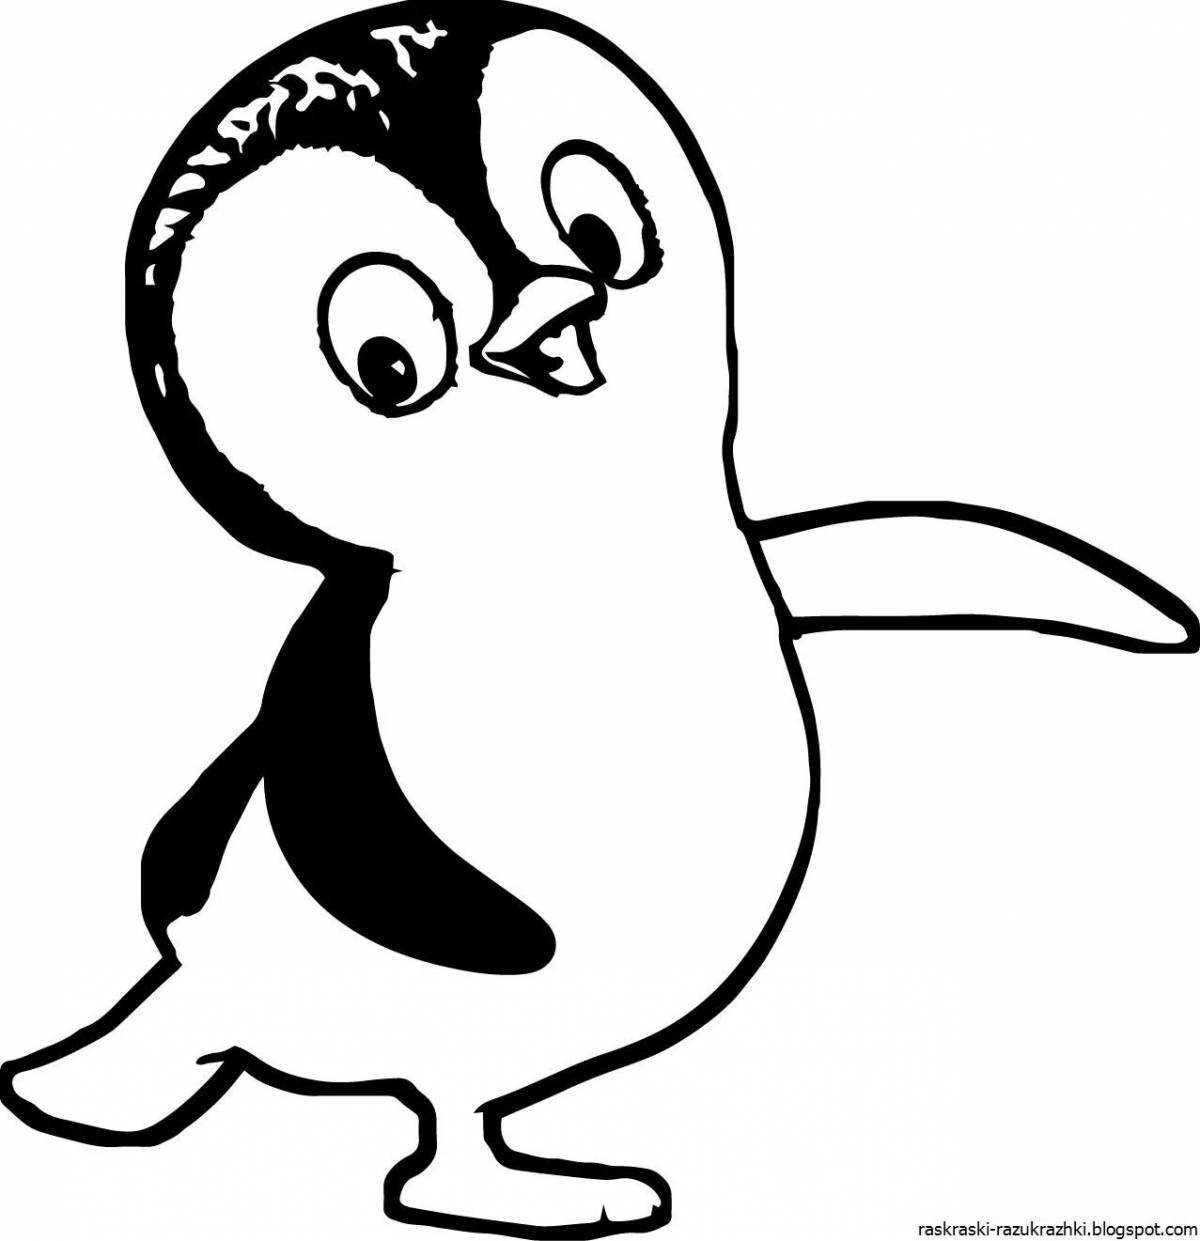 Adorable penguin drawing for kids